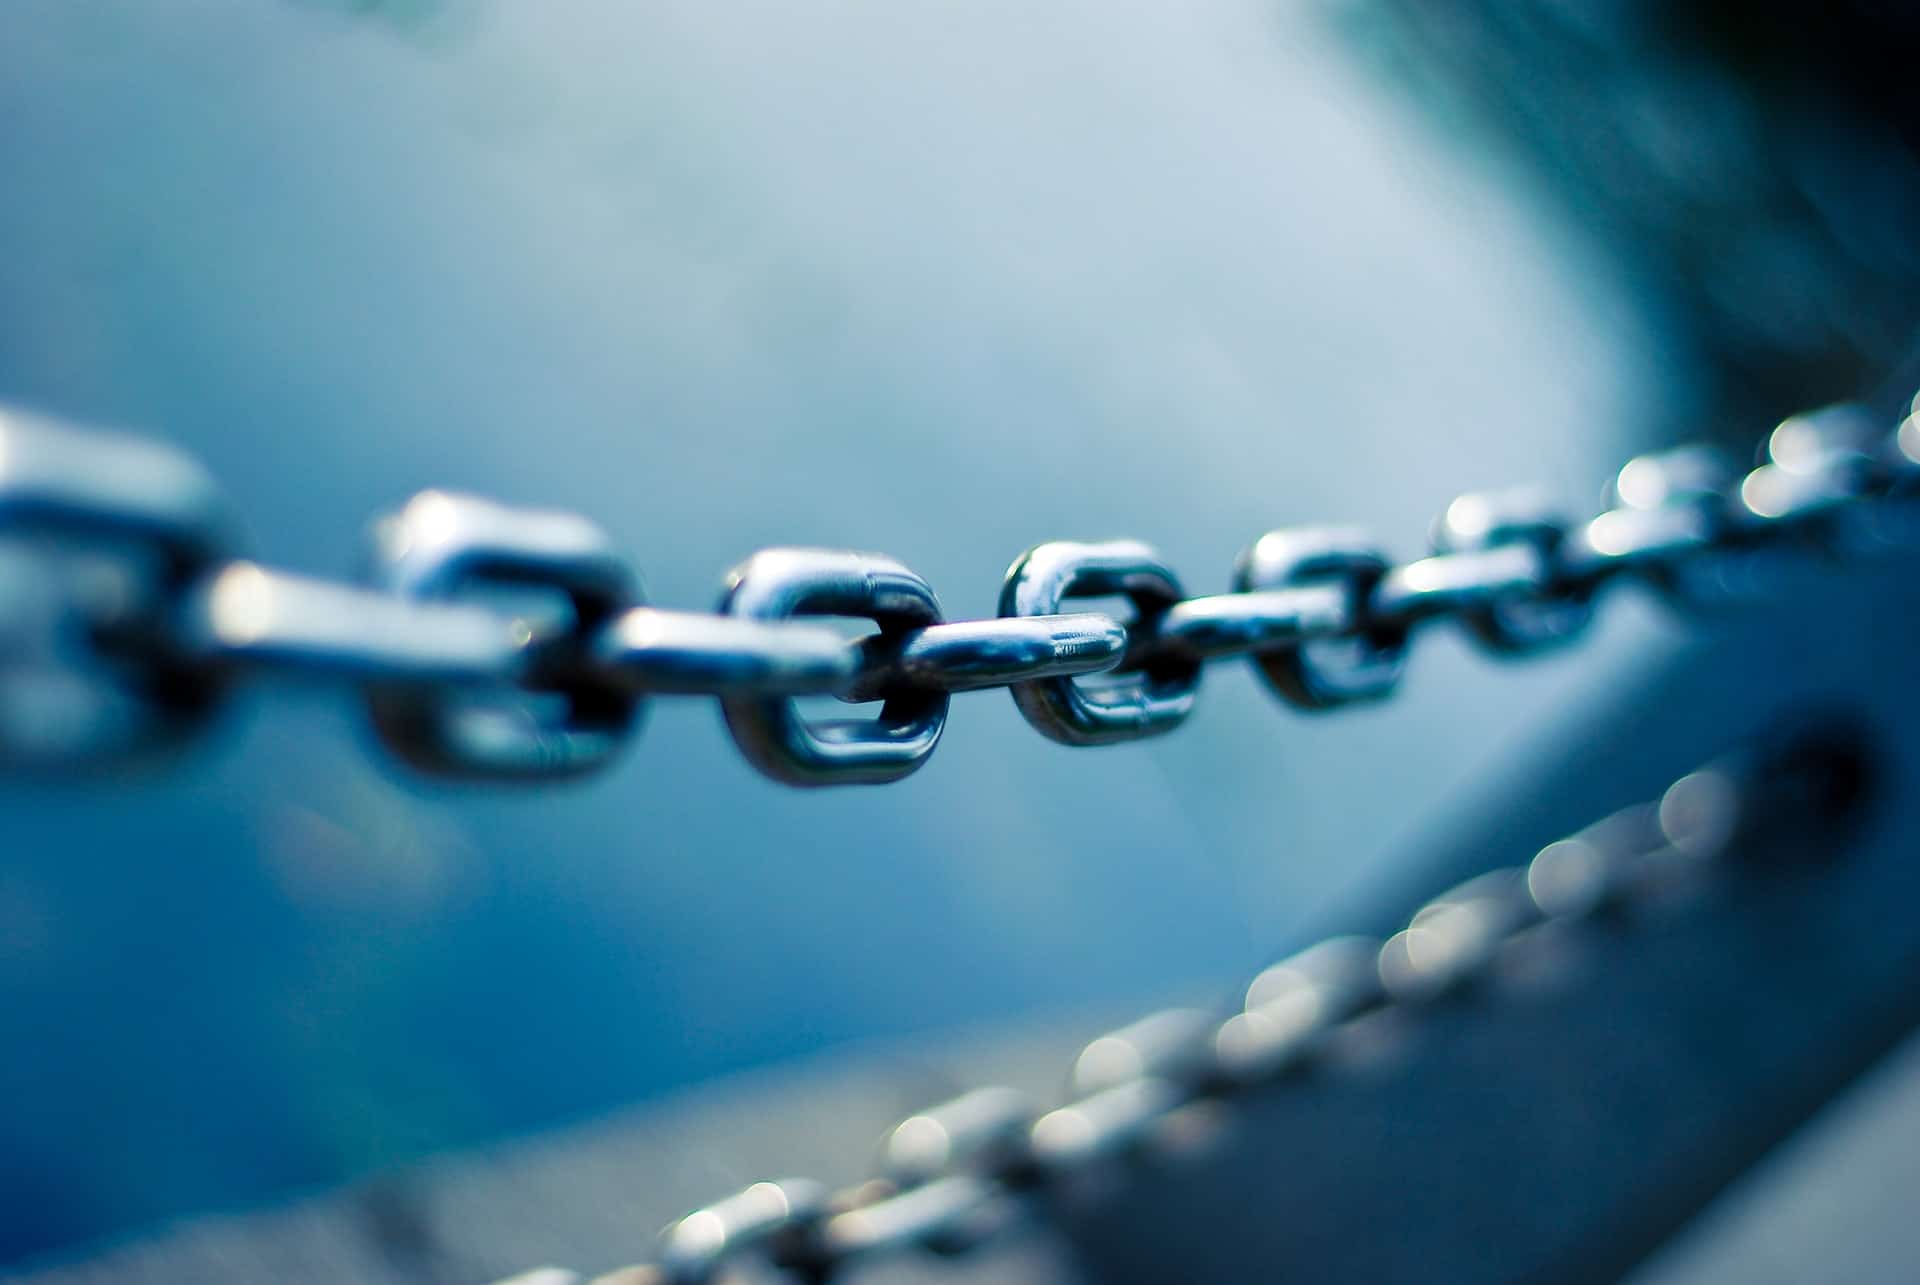 Image of a chain as an exemplary representation for the supply chain